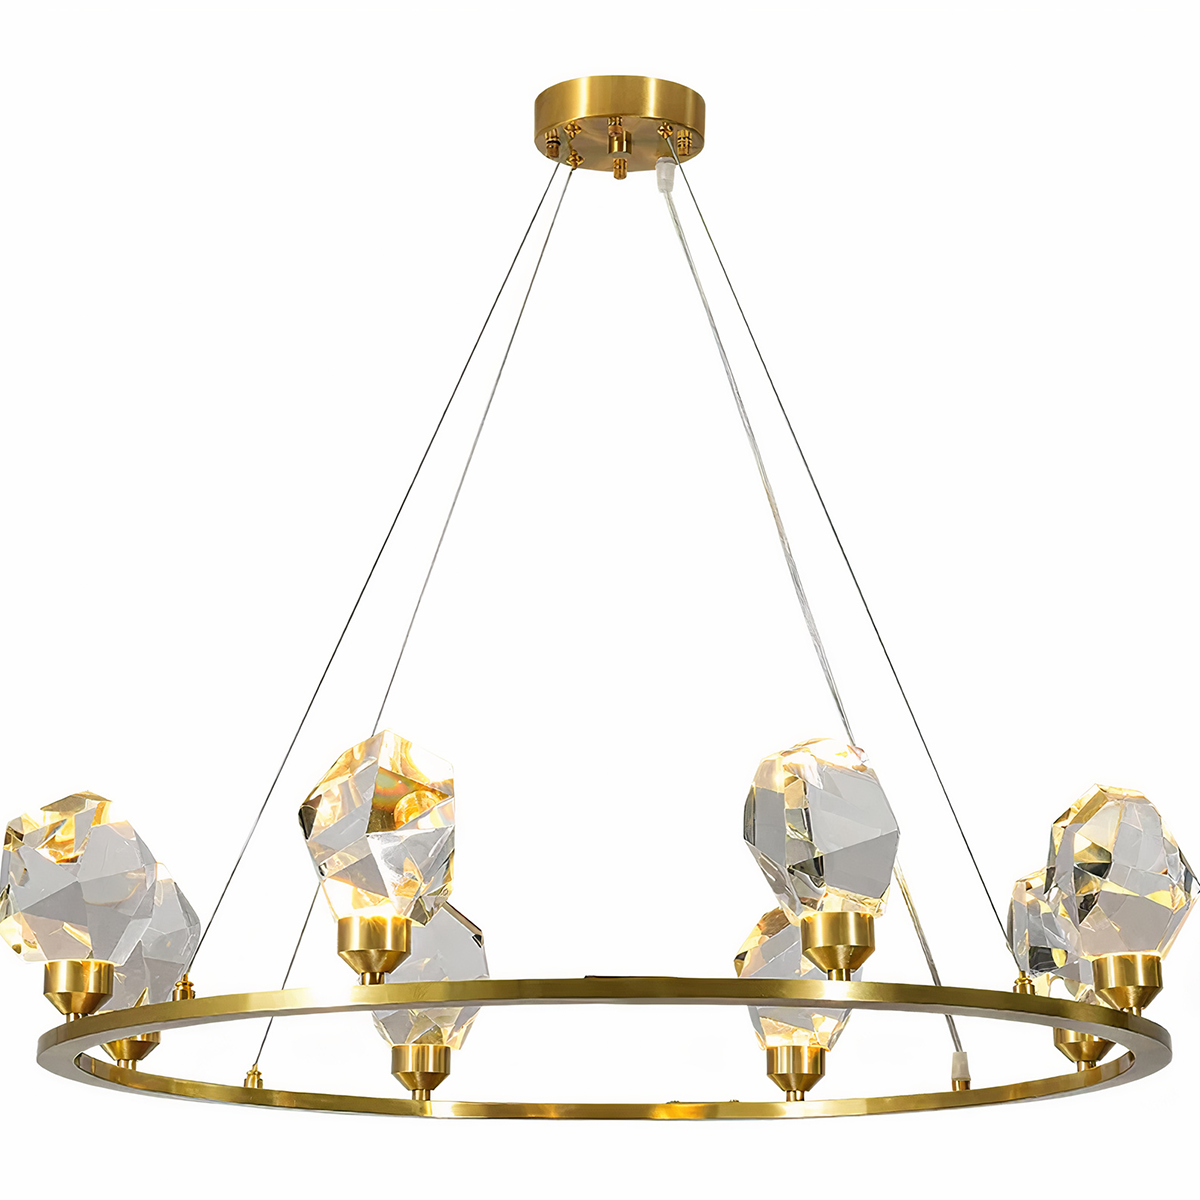 Choosing Elegant Chandeliers Top Tips for Selecting Sophisticated Chandeliers for Your Home